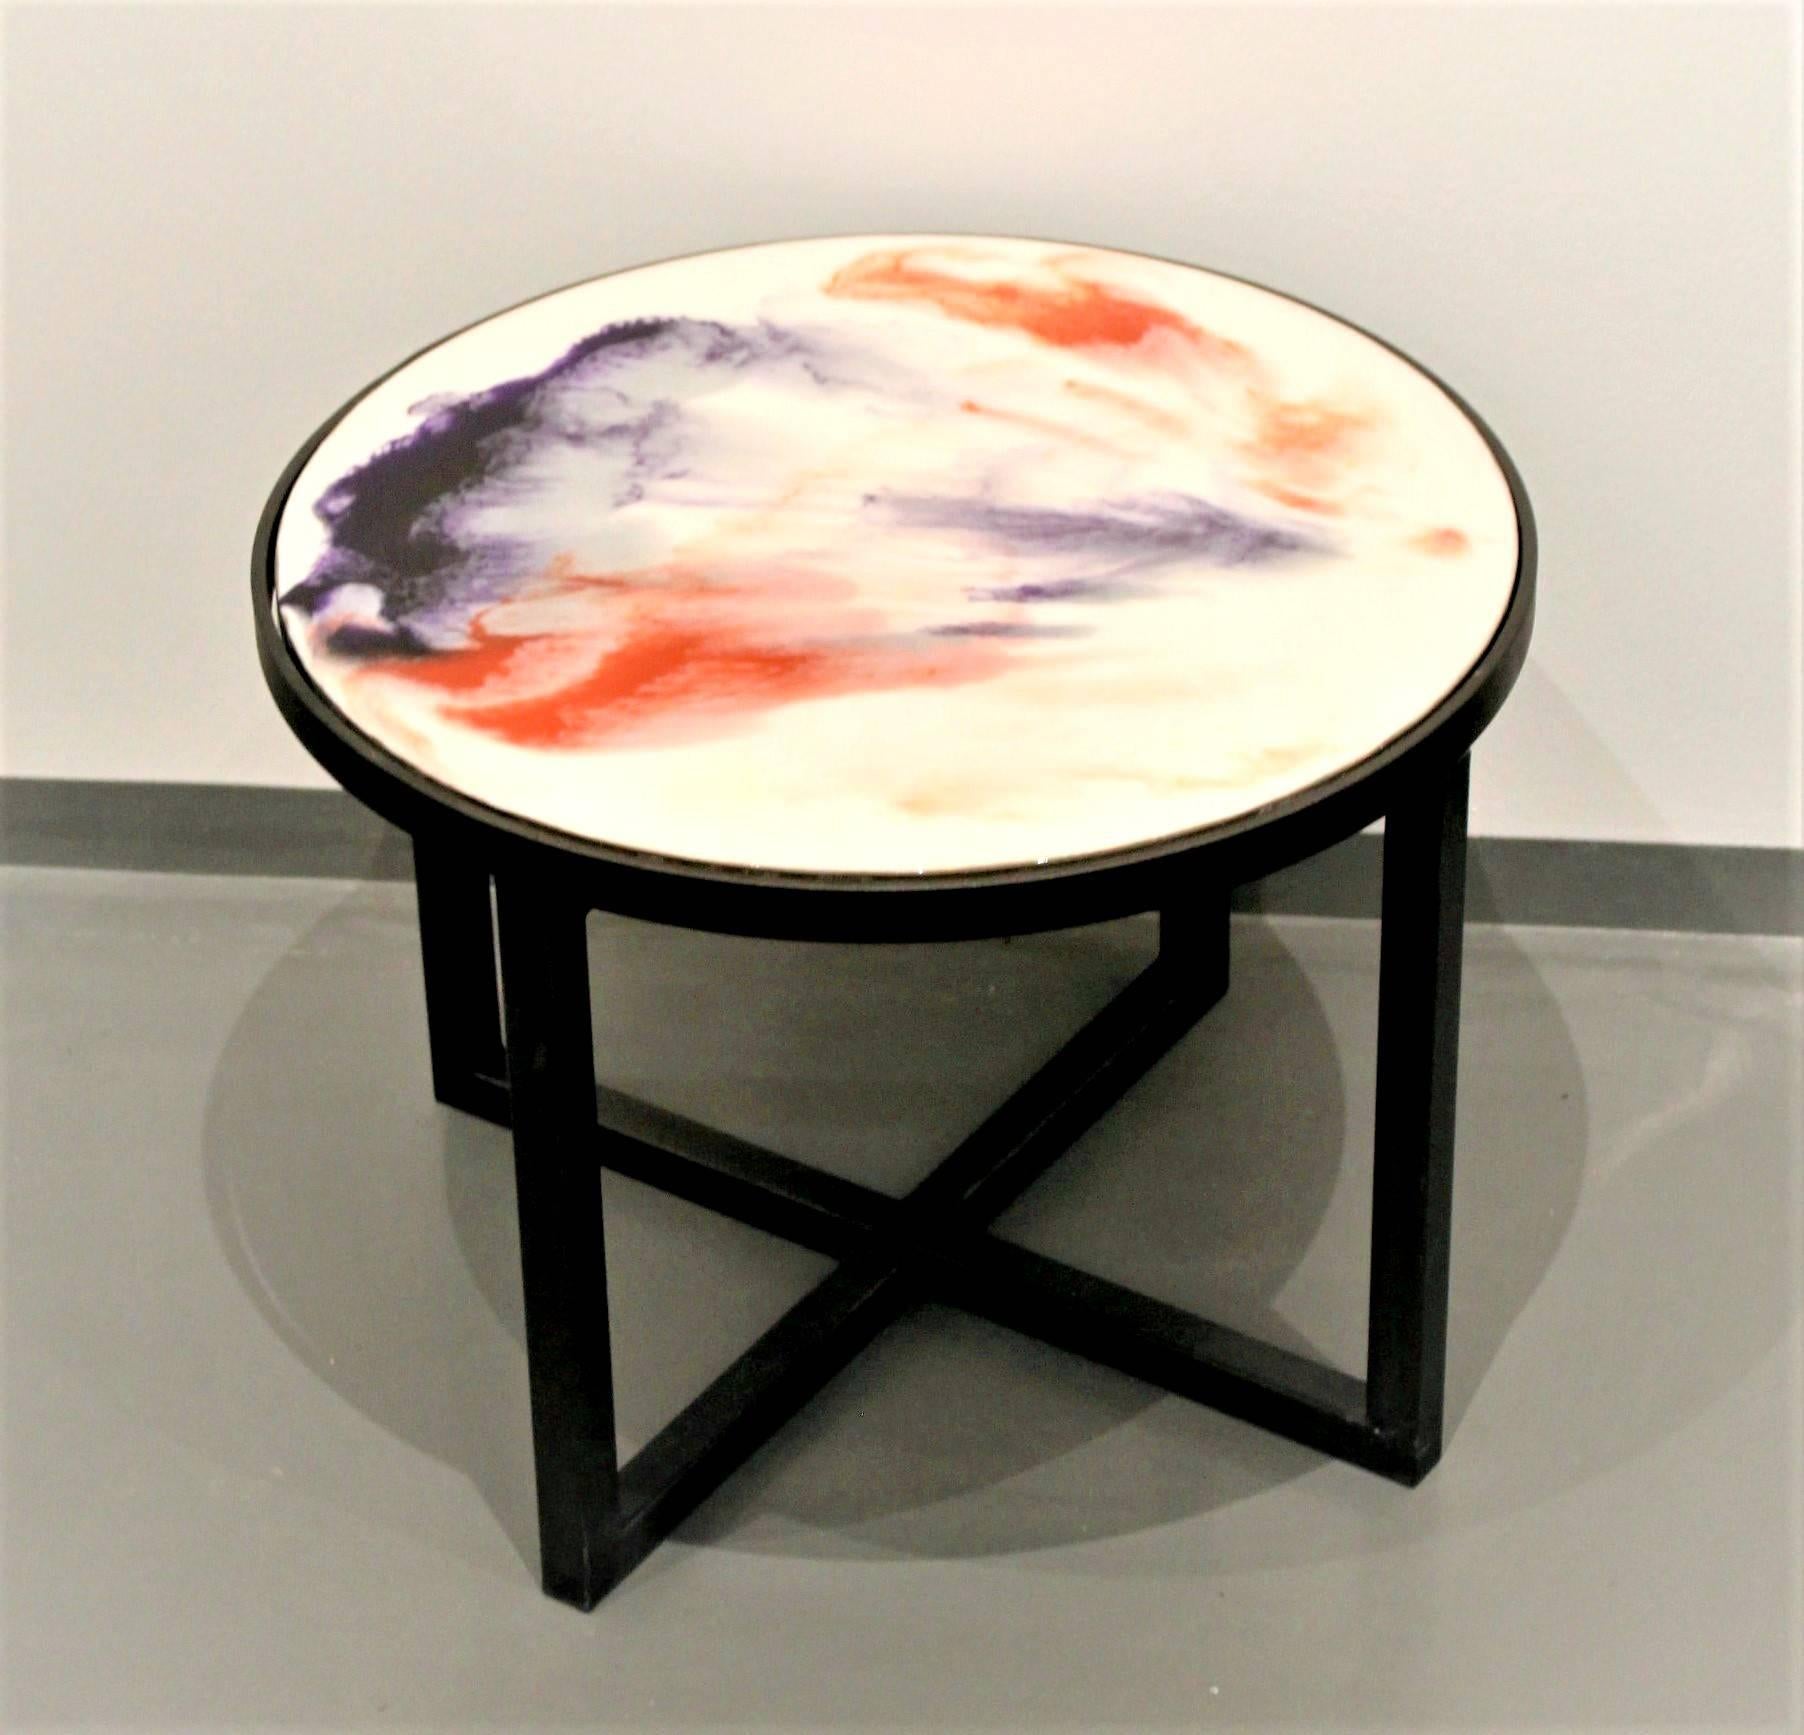 Part of Viscosity Art & Resin Gallery art furniture collection, this colorful coffee table is an one of a kind creation. The tabletop is made of hand painted layers of colored resin on wood. Vivid orange and muted violet, floating on cloudy white